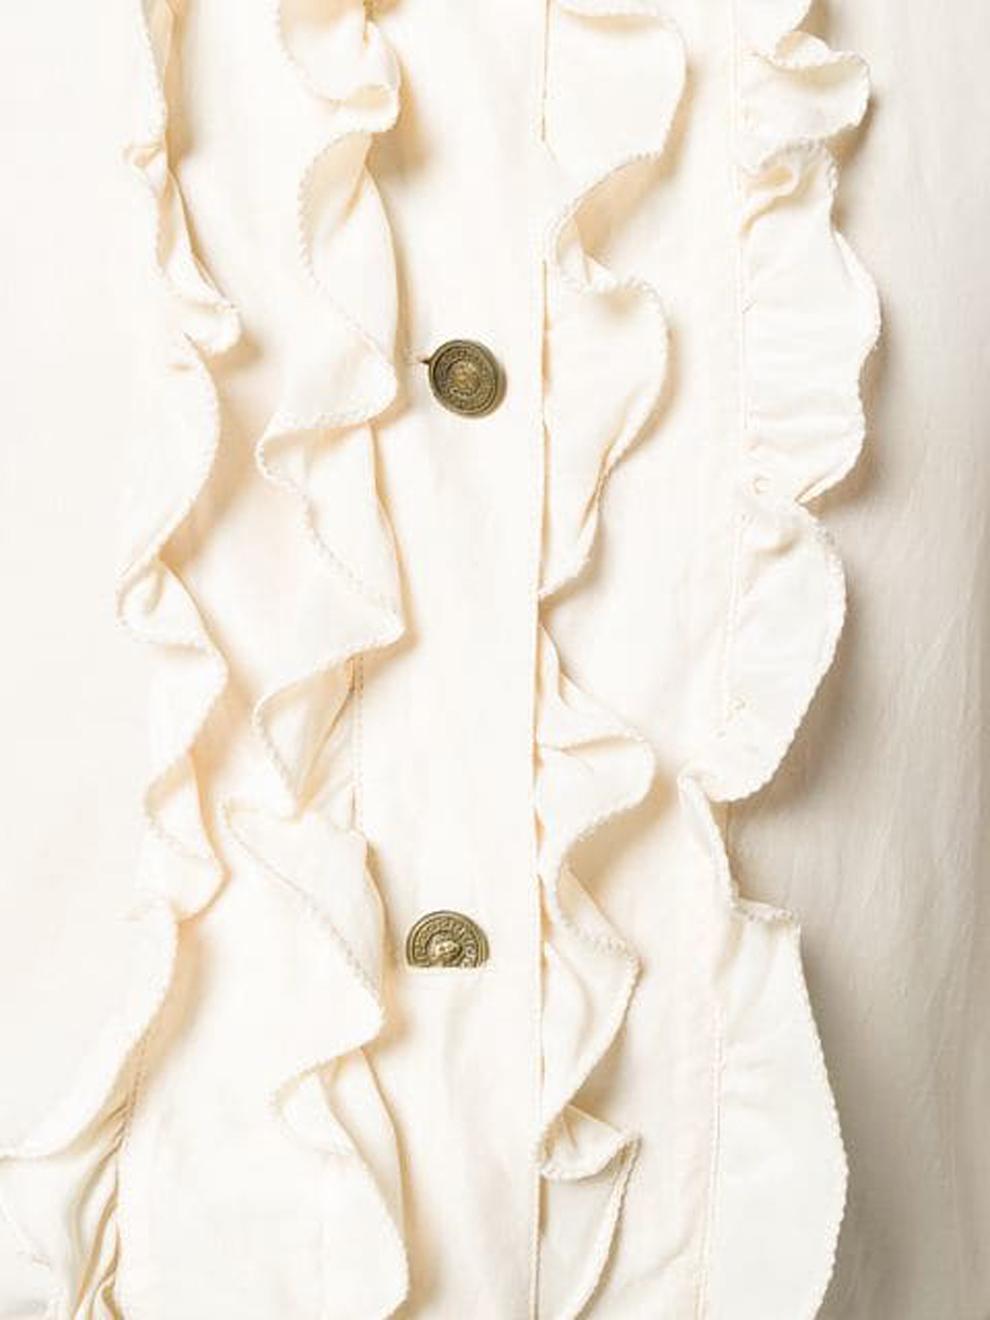 Versace ivory silk shirt featuring  front silk frills, front logo Medusa buttons, a shirt collar.
In excellent condition. Made in Italy. 
Estimated size 40fr/US8/UK12
We guarantee you will receive this gorgeous item as described and showed on